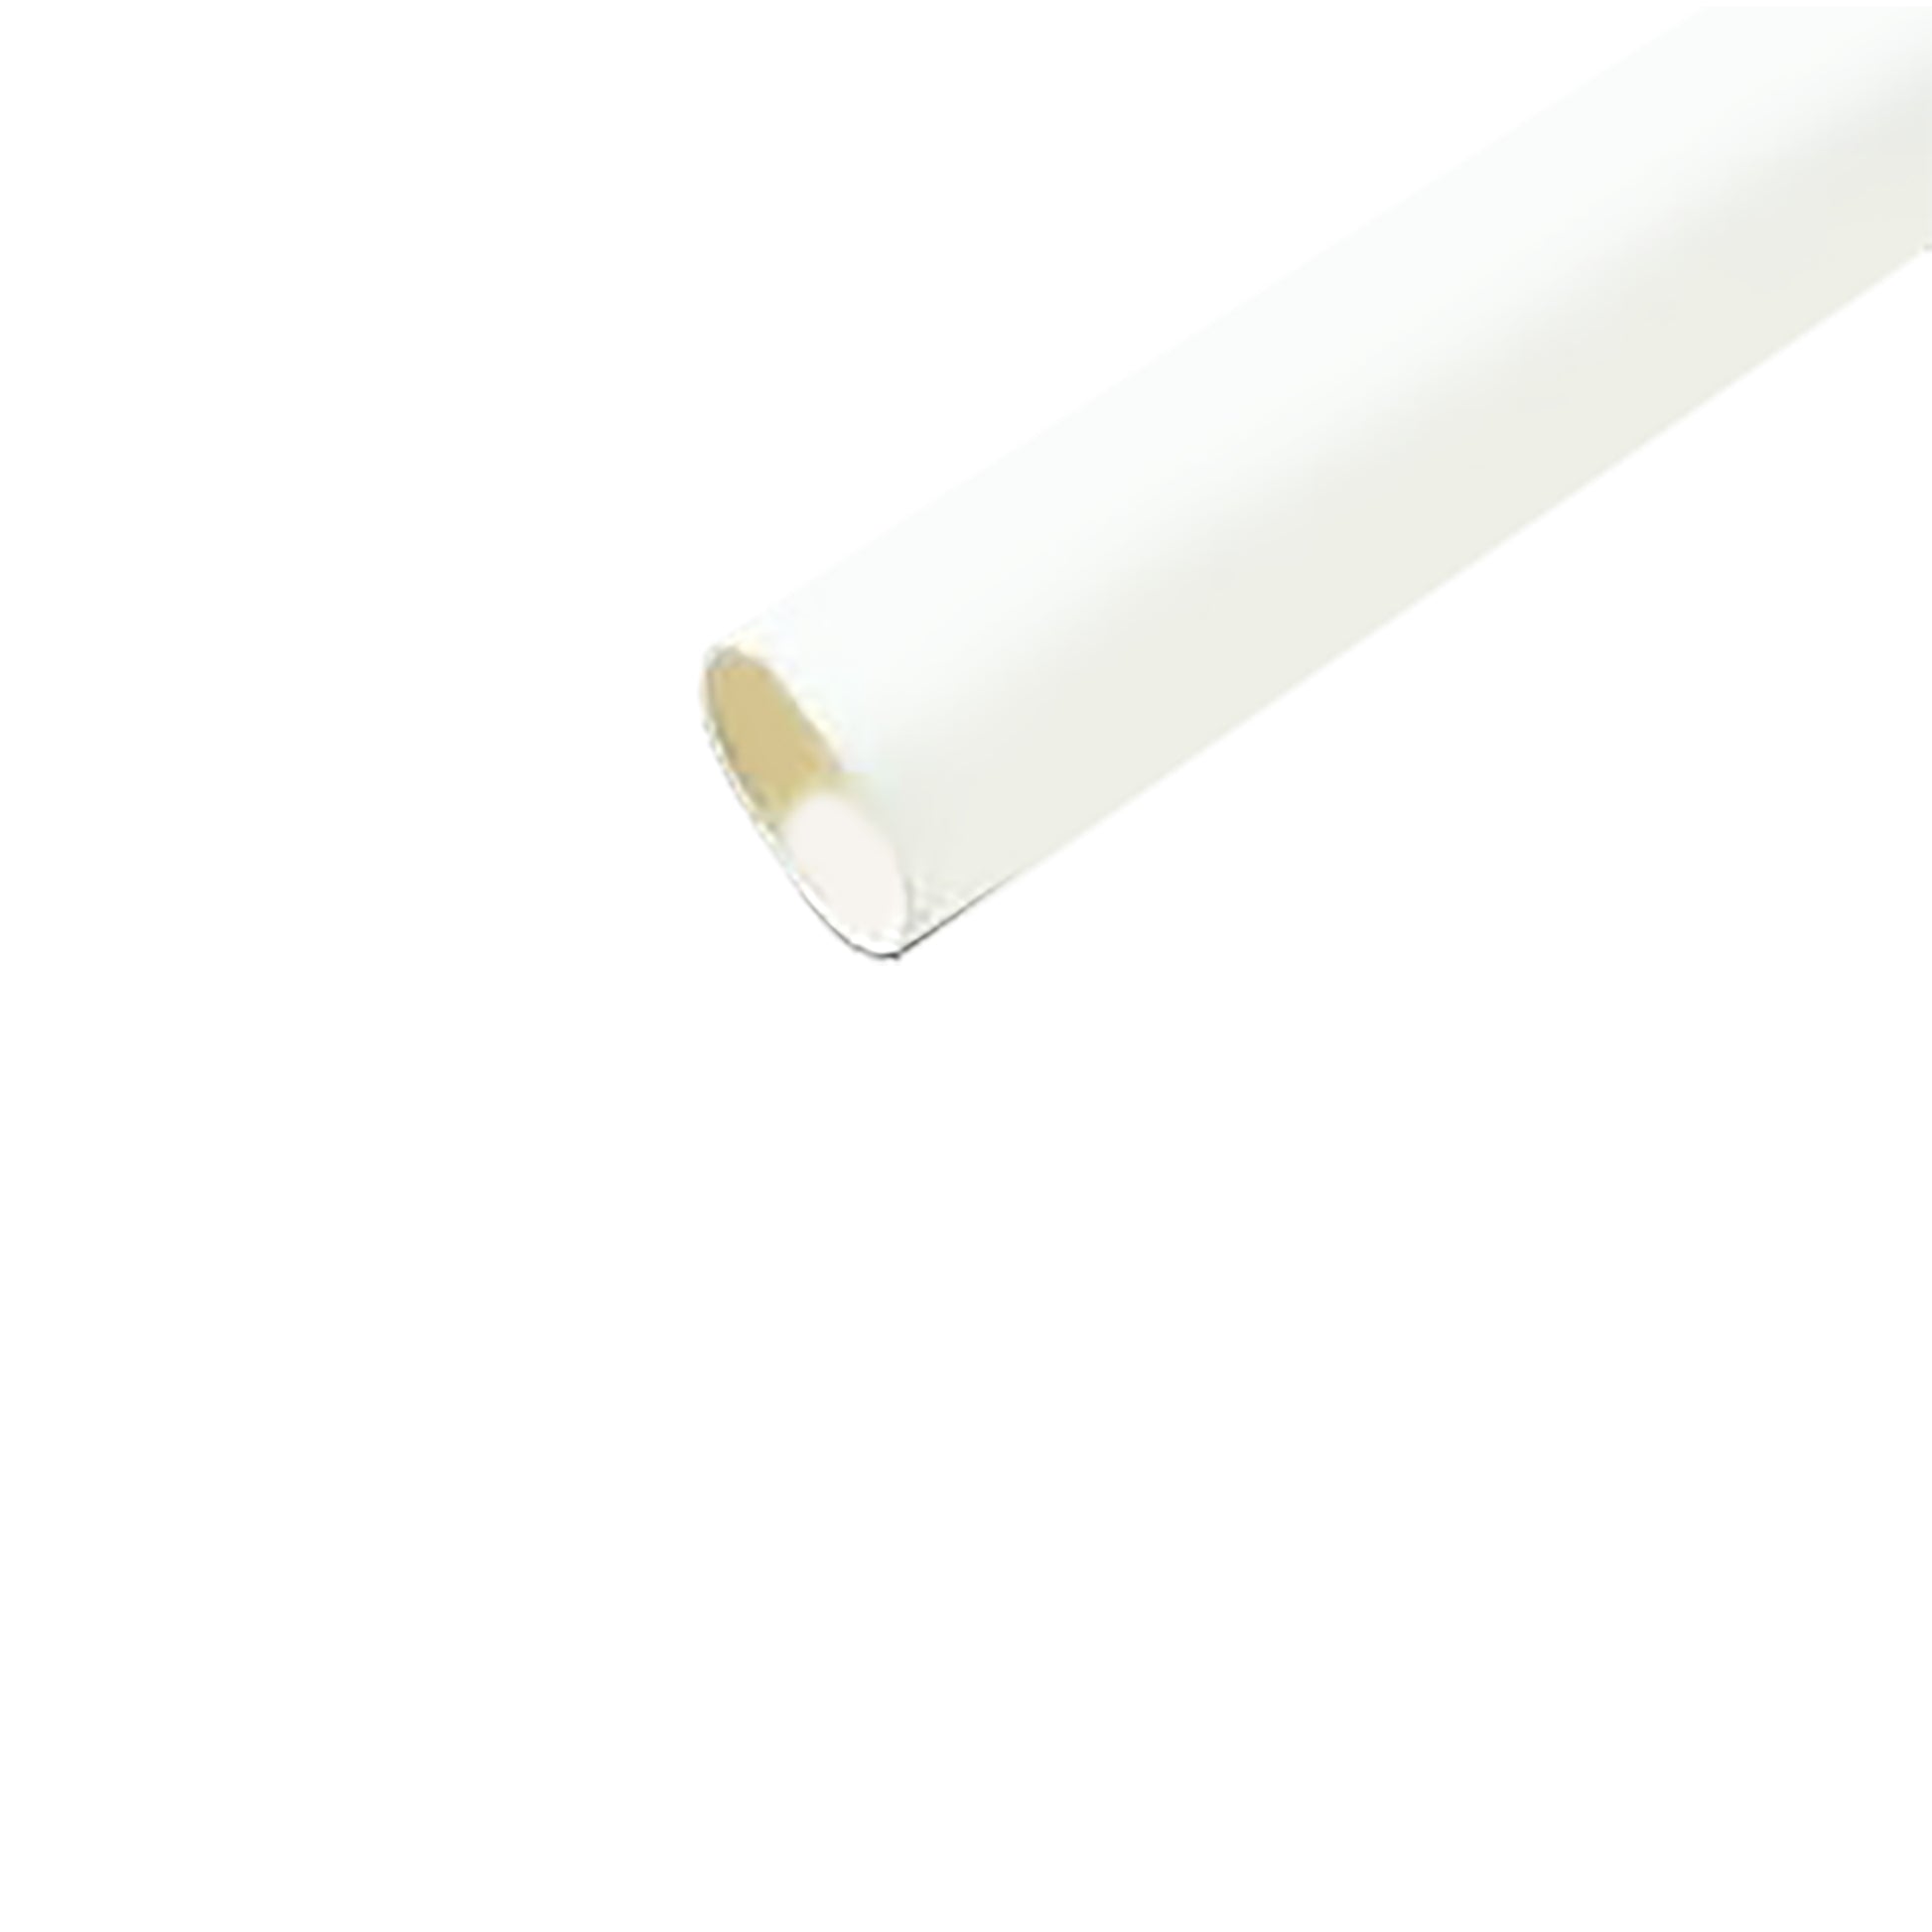 Flexible Thin Single Wall Non-Adhesive Heat Shrink Tubing 2:1 White 3/4" ID - 12" Inch 10 Pack